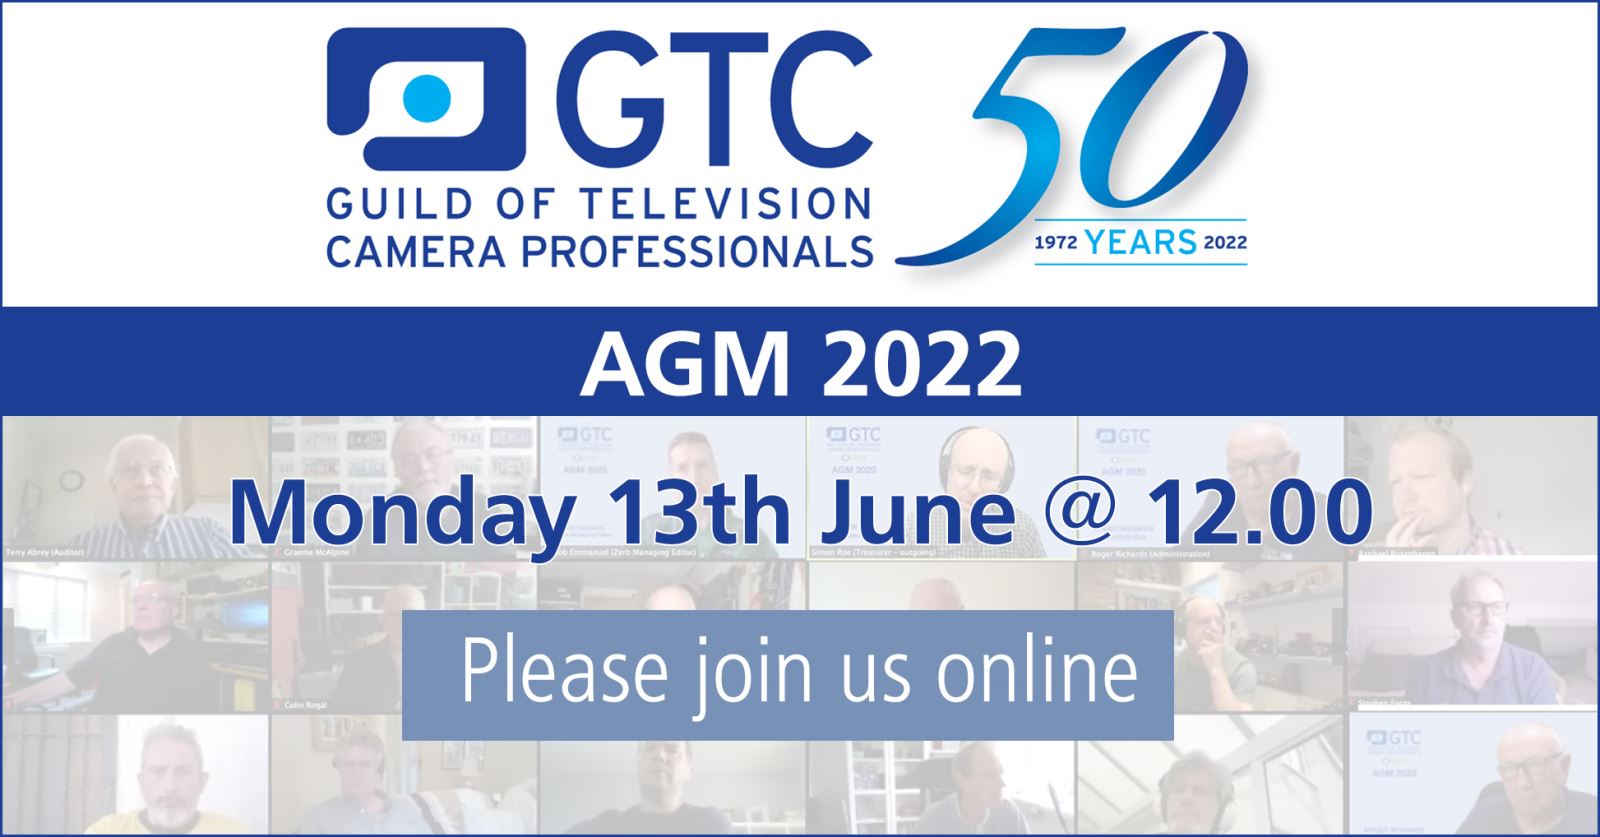 GTC Members - Please join us at our Annual General Meeting on 13th June 2022